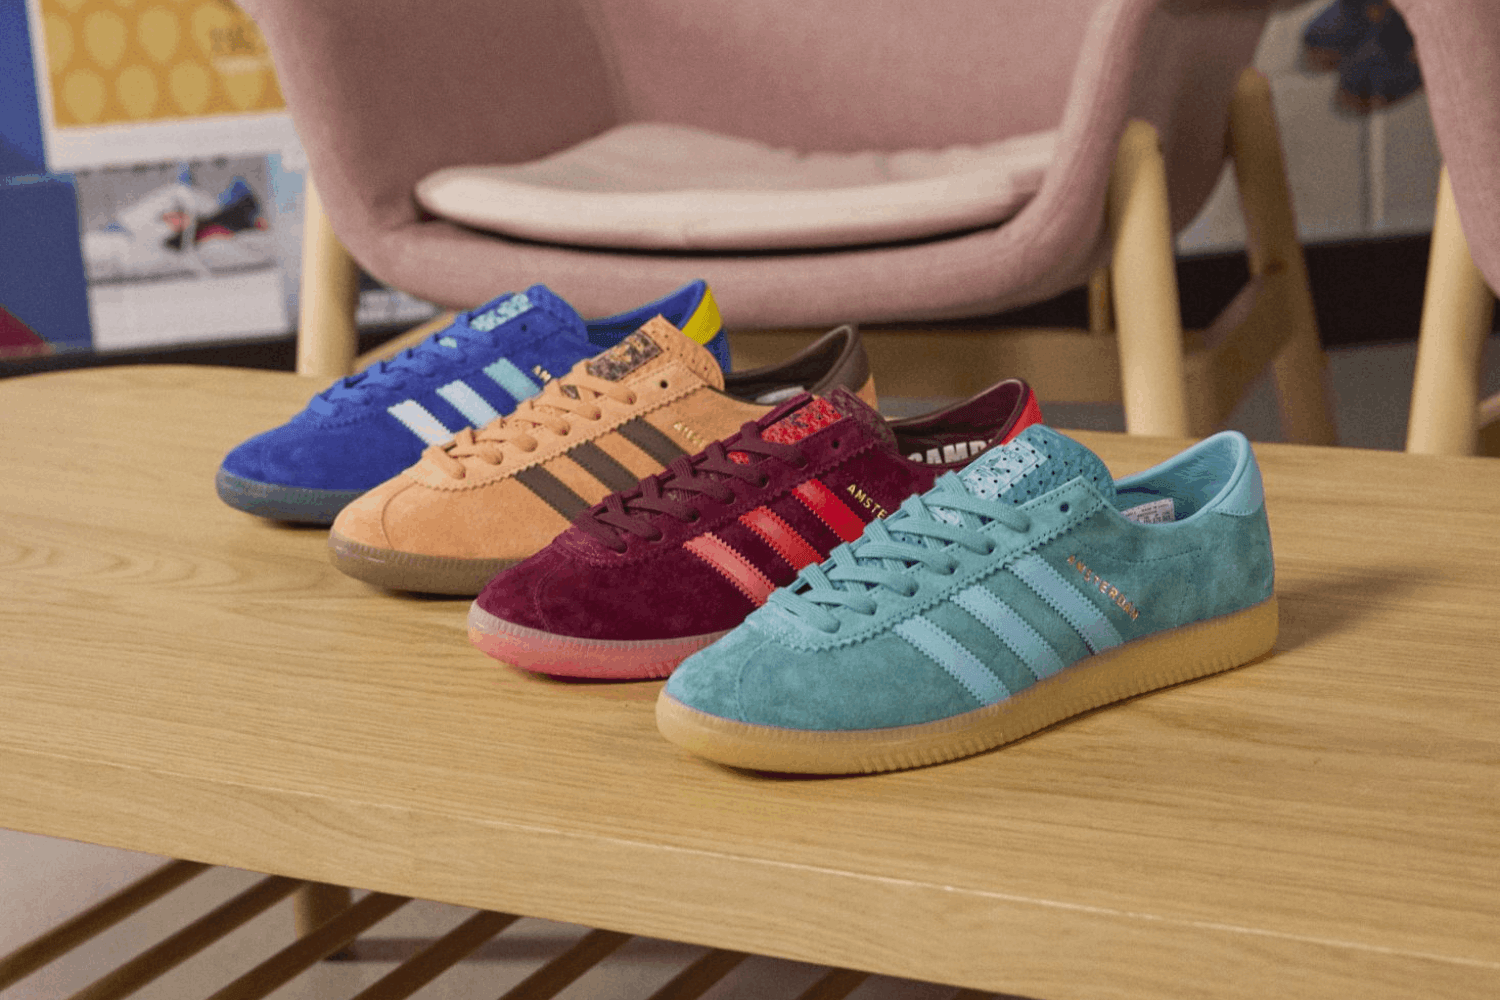 New adidas Amsterdam colorways will drop exclusively at size? in 2024